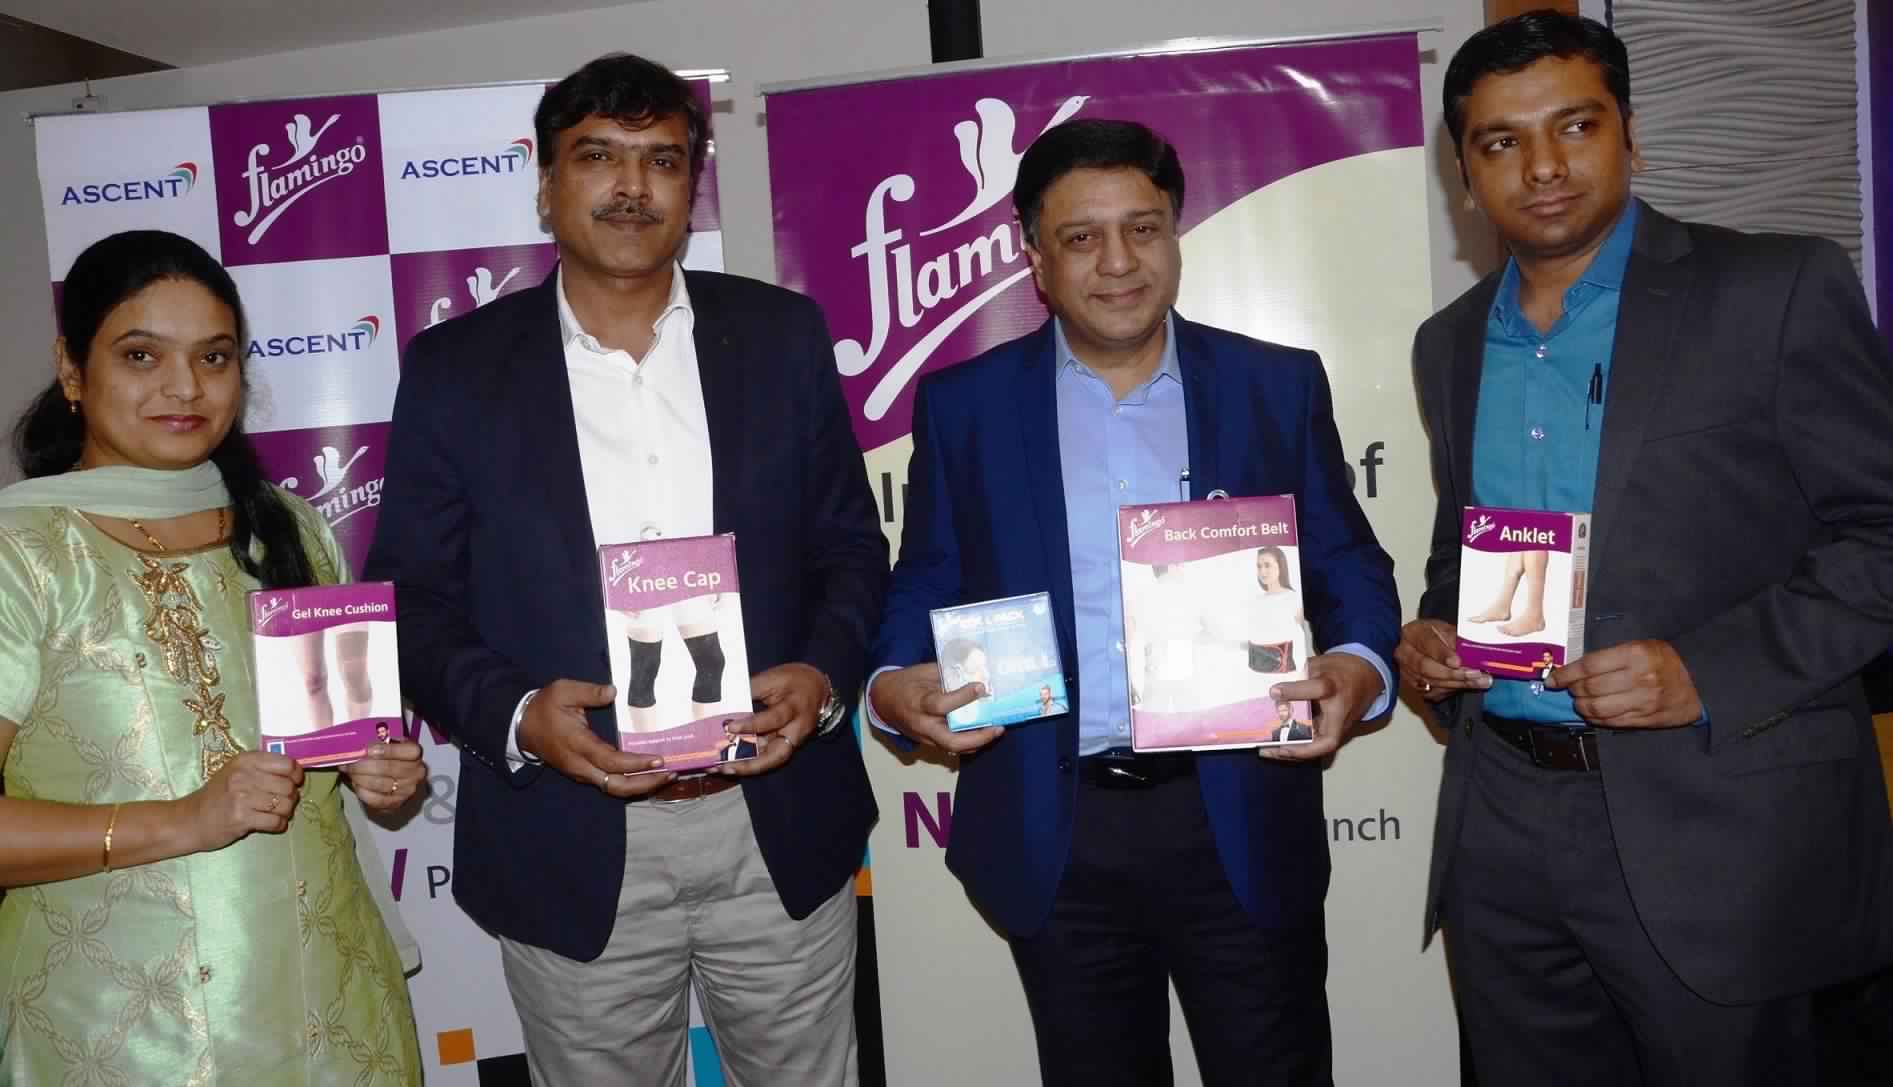 L-R: Ms. Mansi Sawant (Manager Strategy; Ascent Meditech Limited), Mr. Rakesh Kumar (Vice President, Sales & Marketing; Ascent Meditech Limited), Mr. Rajiv Mistry (MD & Founder; Ascent Meditech Limited), Mr. Dipayan Kundu(Brand Marketing Manager; Ascent Meditech Limited) displaying the Flamingo products at the press conference held in Mumbai - Photo By Sachin Murdeshwar GPN